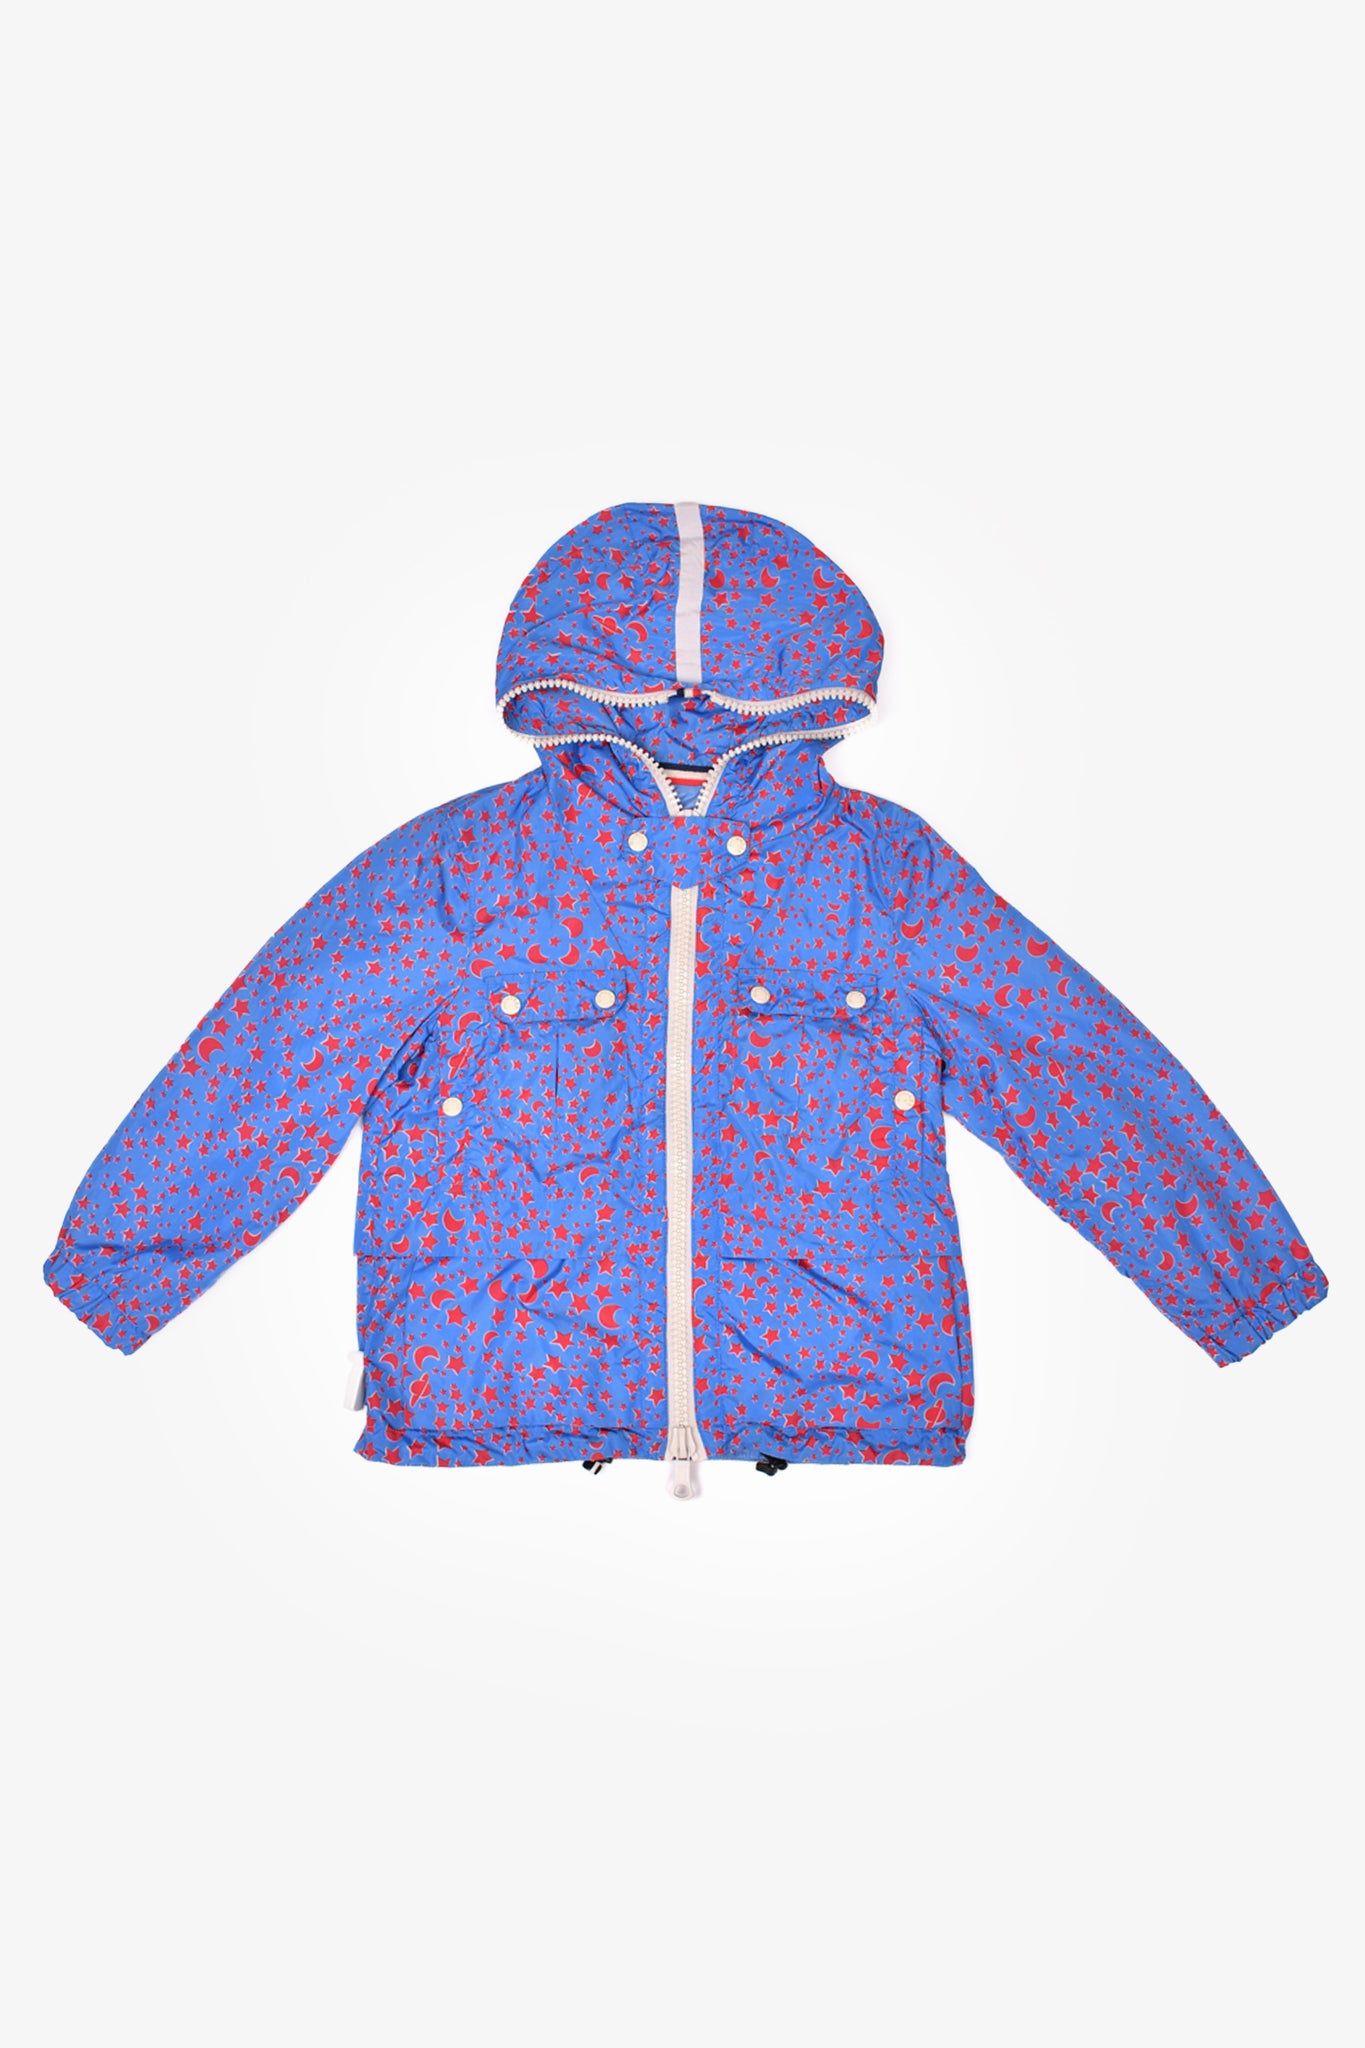 Moncler Blue/Red Stars and Moons Nylon Windbreaker with White Zipper 14Y Kids